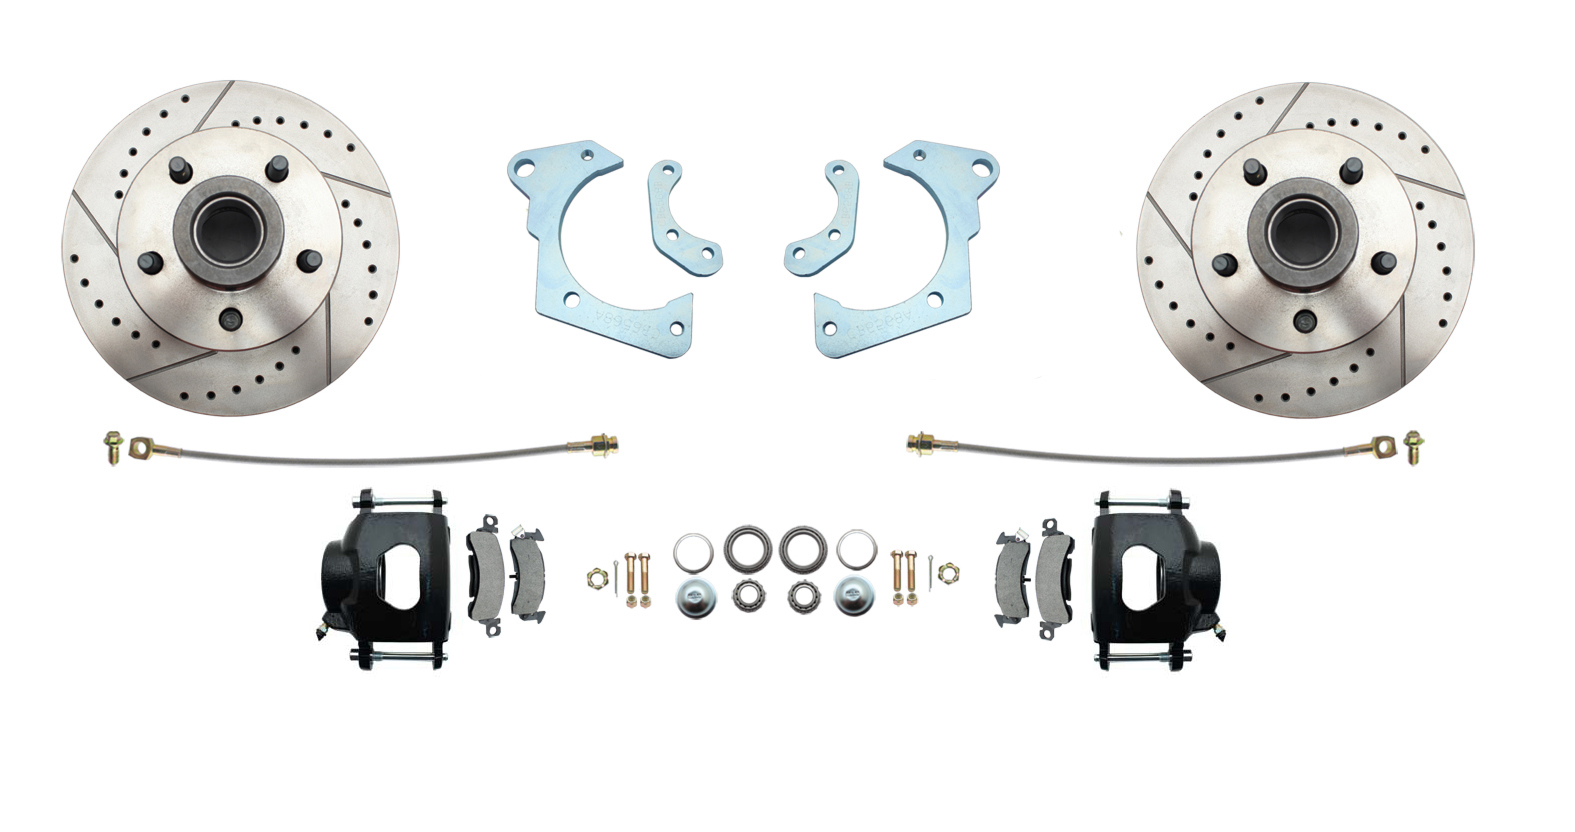 1965-1968 Full Size Chevy Complete Disc Brake Conversion Kit W/ Powder Coated Black Calipers & Drilled/ Slotted Rotors